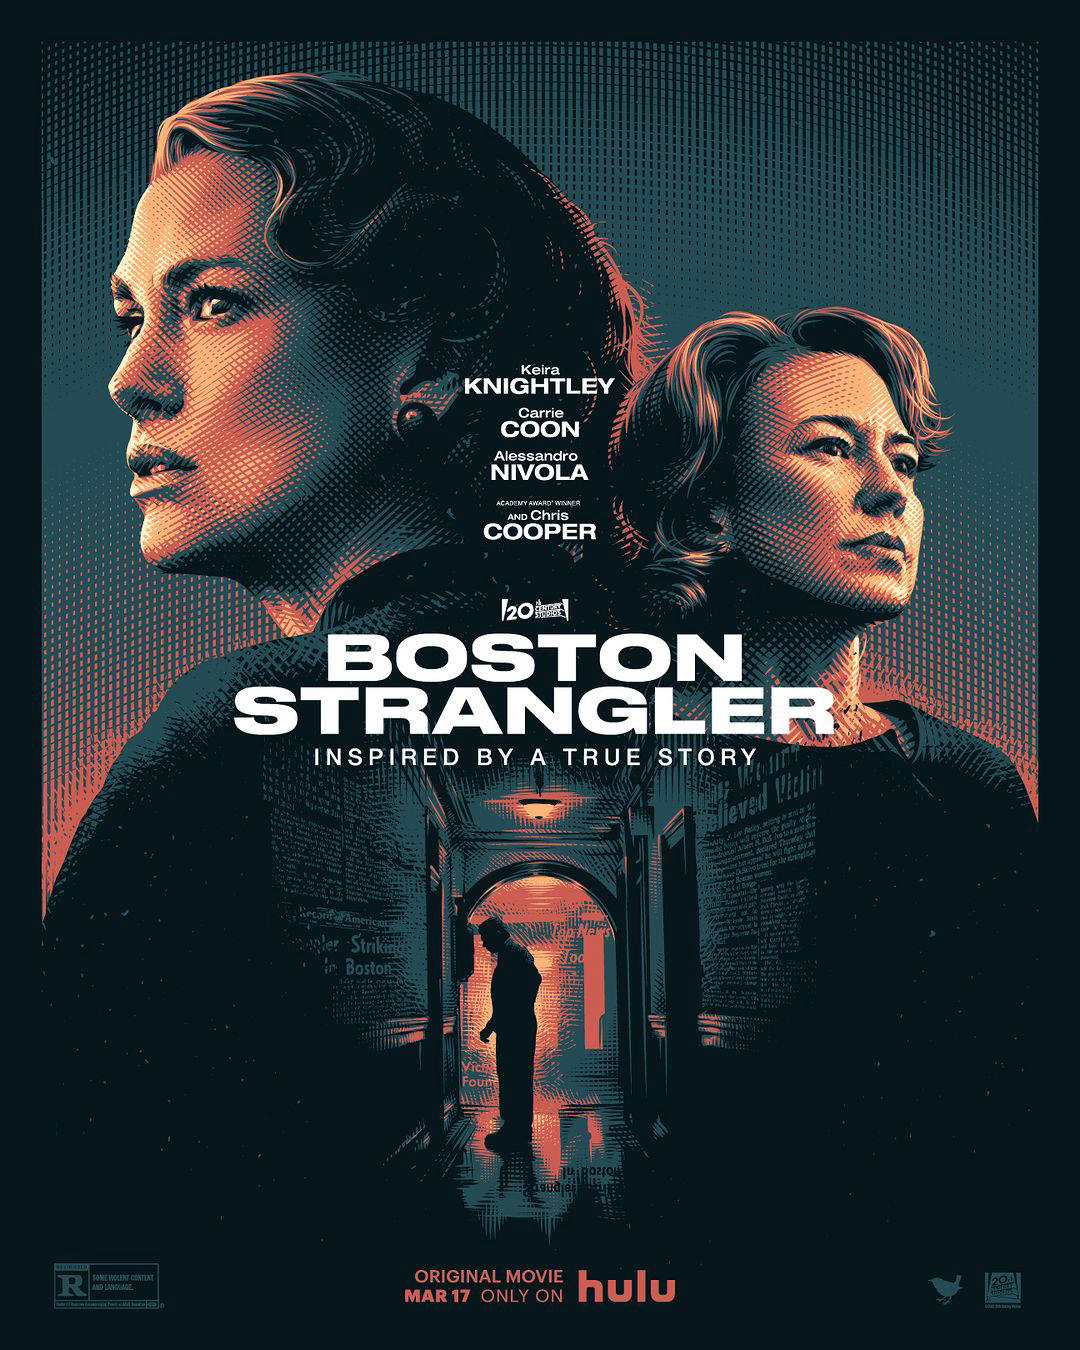 Don't miss Keira Knightley and Carrie Coon in #BostonStrangler, now streaming on #Hulu